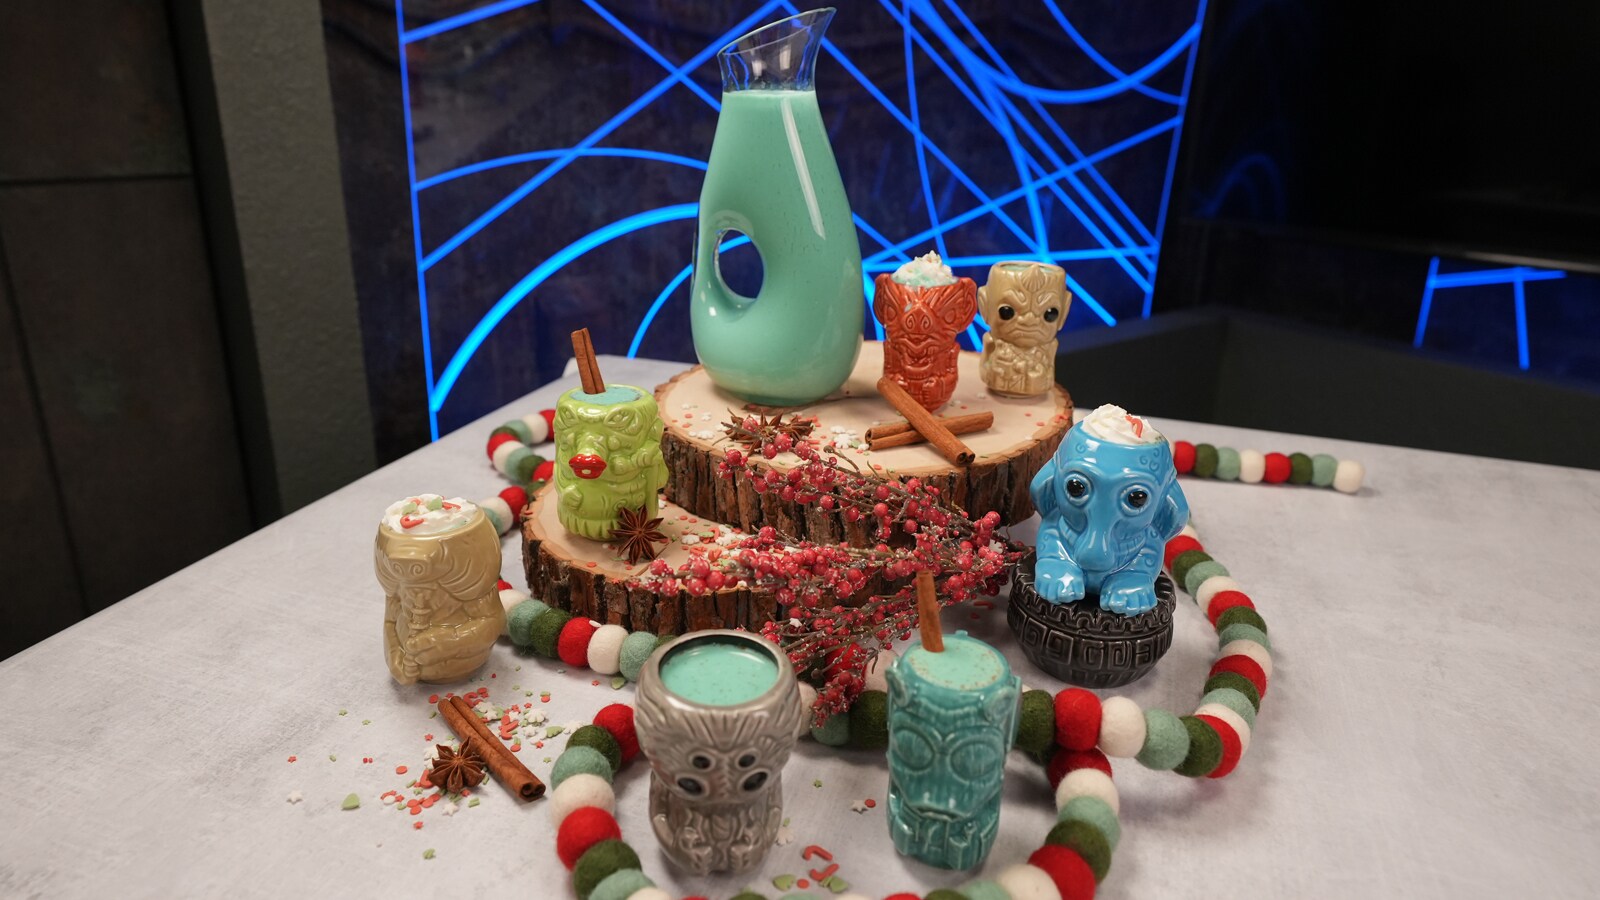 Celebrate the Holidays with a Galactic Glass of Blue Milk Eggnog